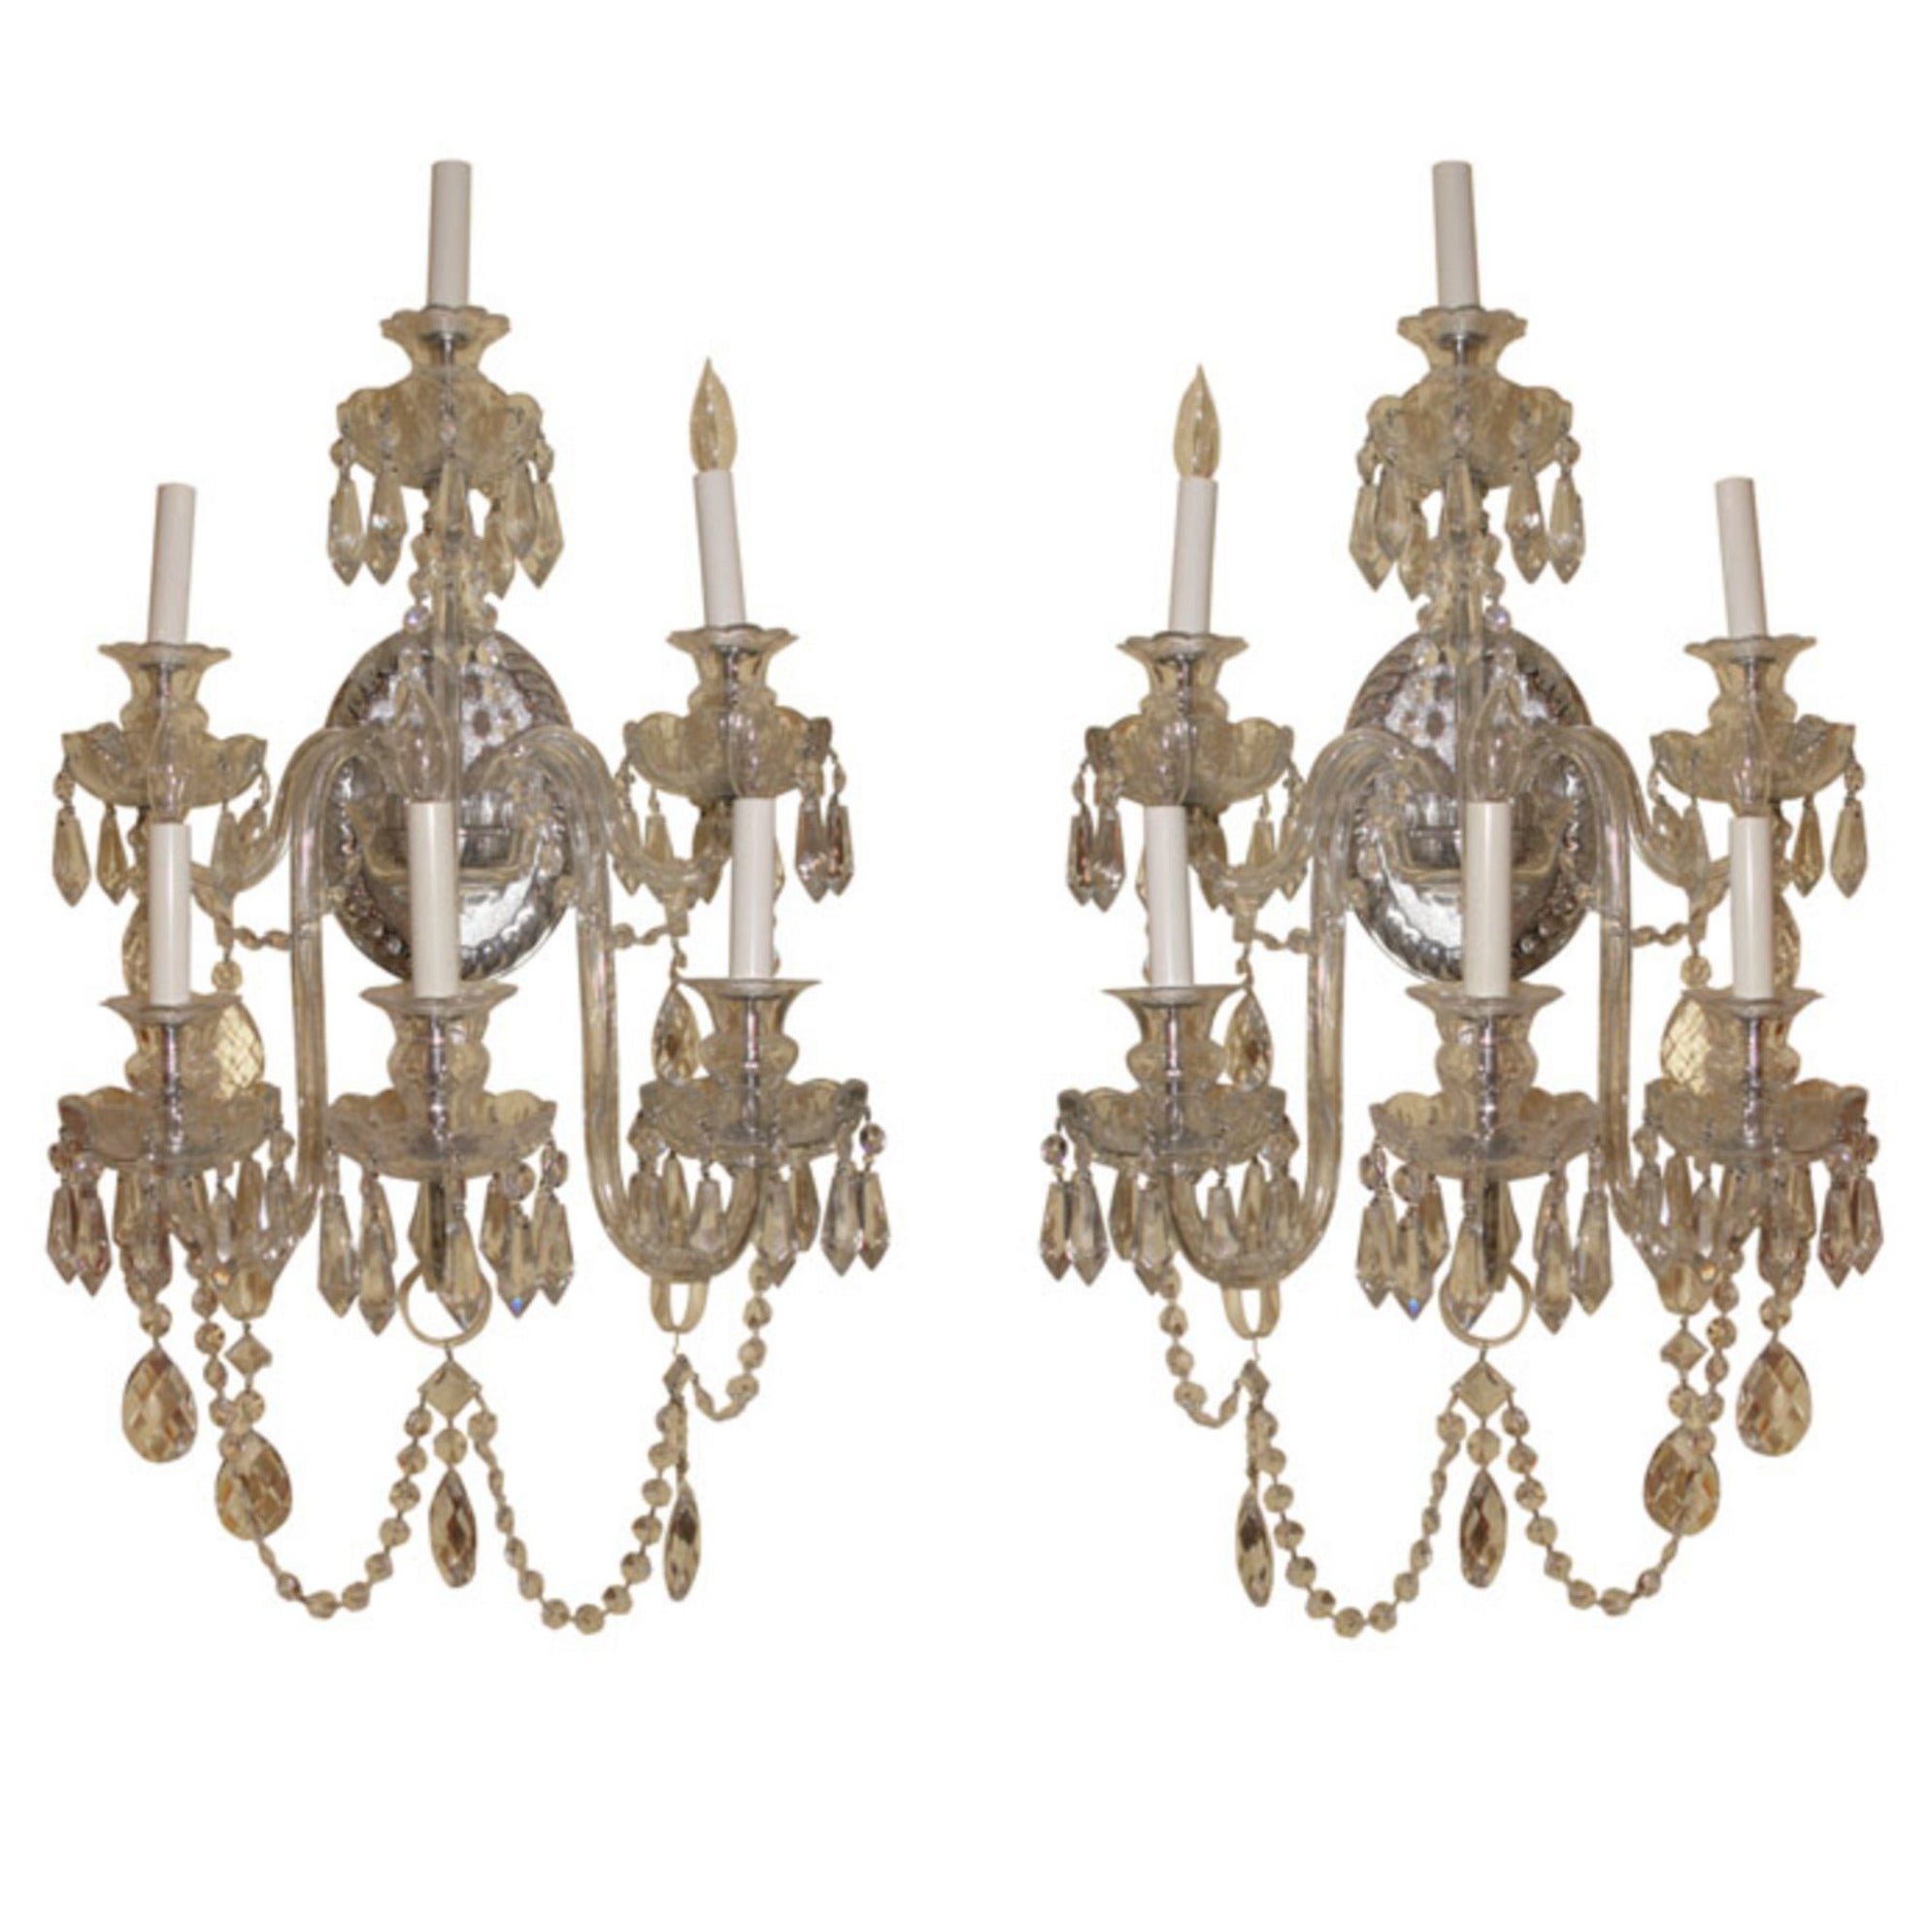 Pair of Cut Glass English Style Two-Tier Six-Arm Wall Light Sconces